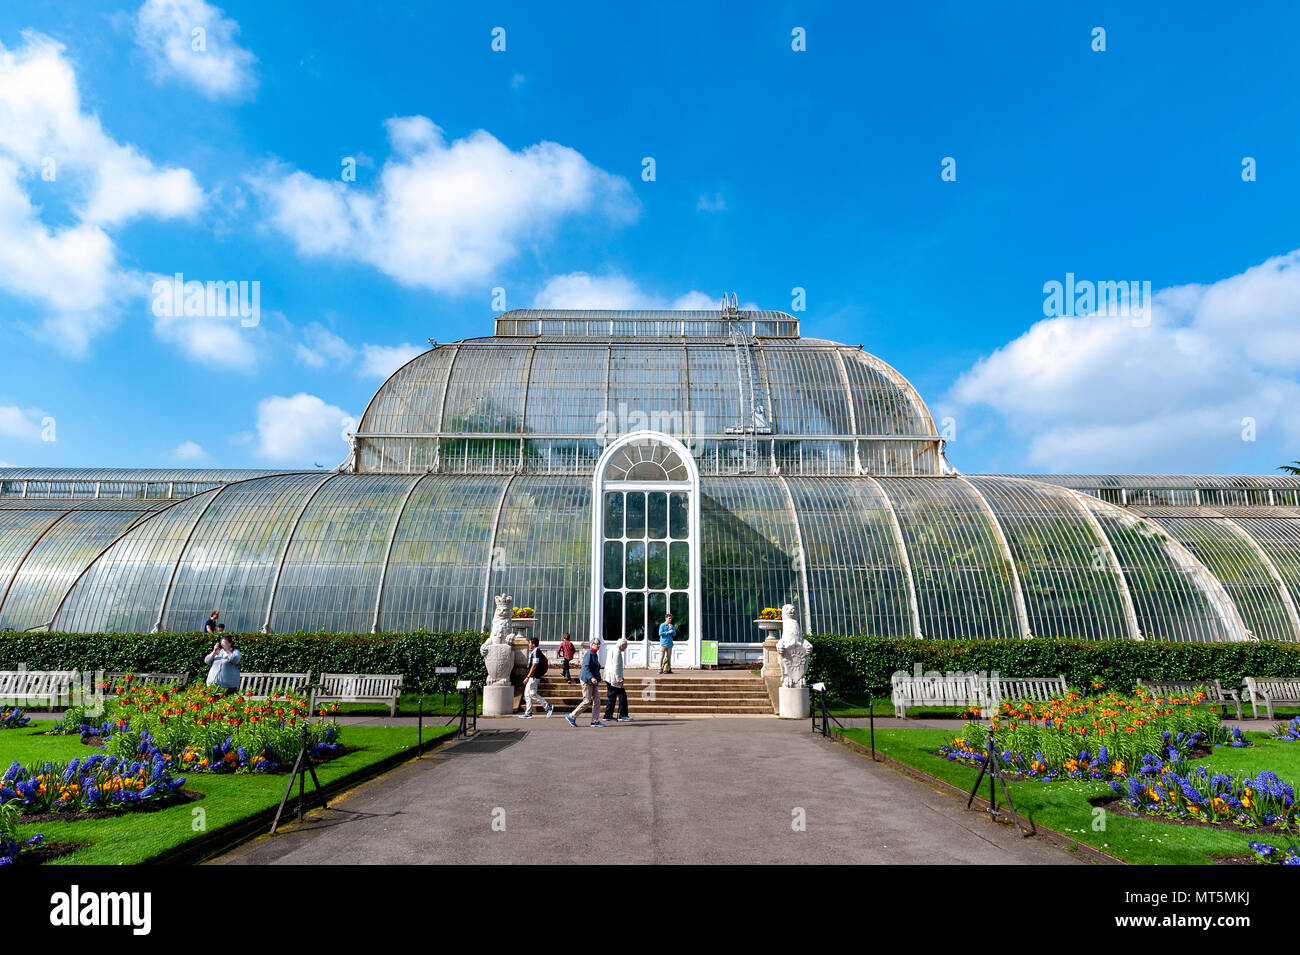 London, UK - April 2018: Palm House, an iconic Victorian glasshouse recreating a rainforest climate for tropical plants at Kew Garden, England Stock Photo